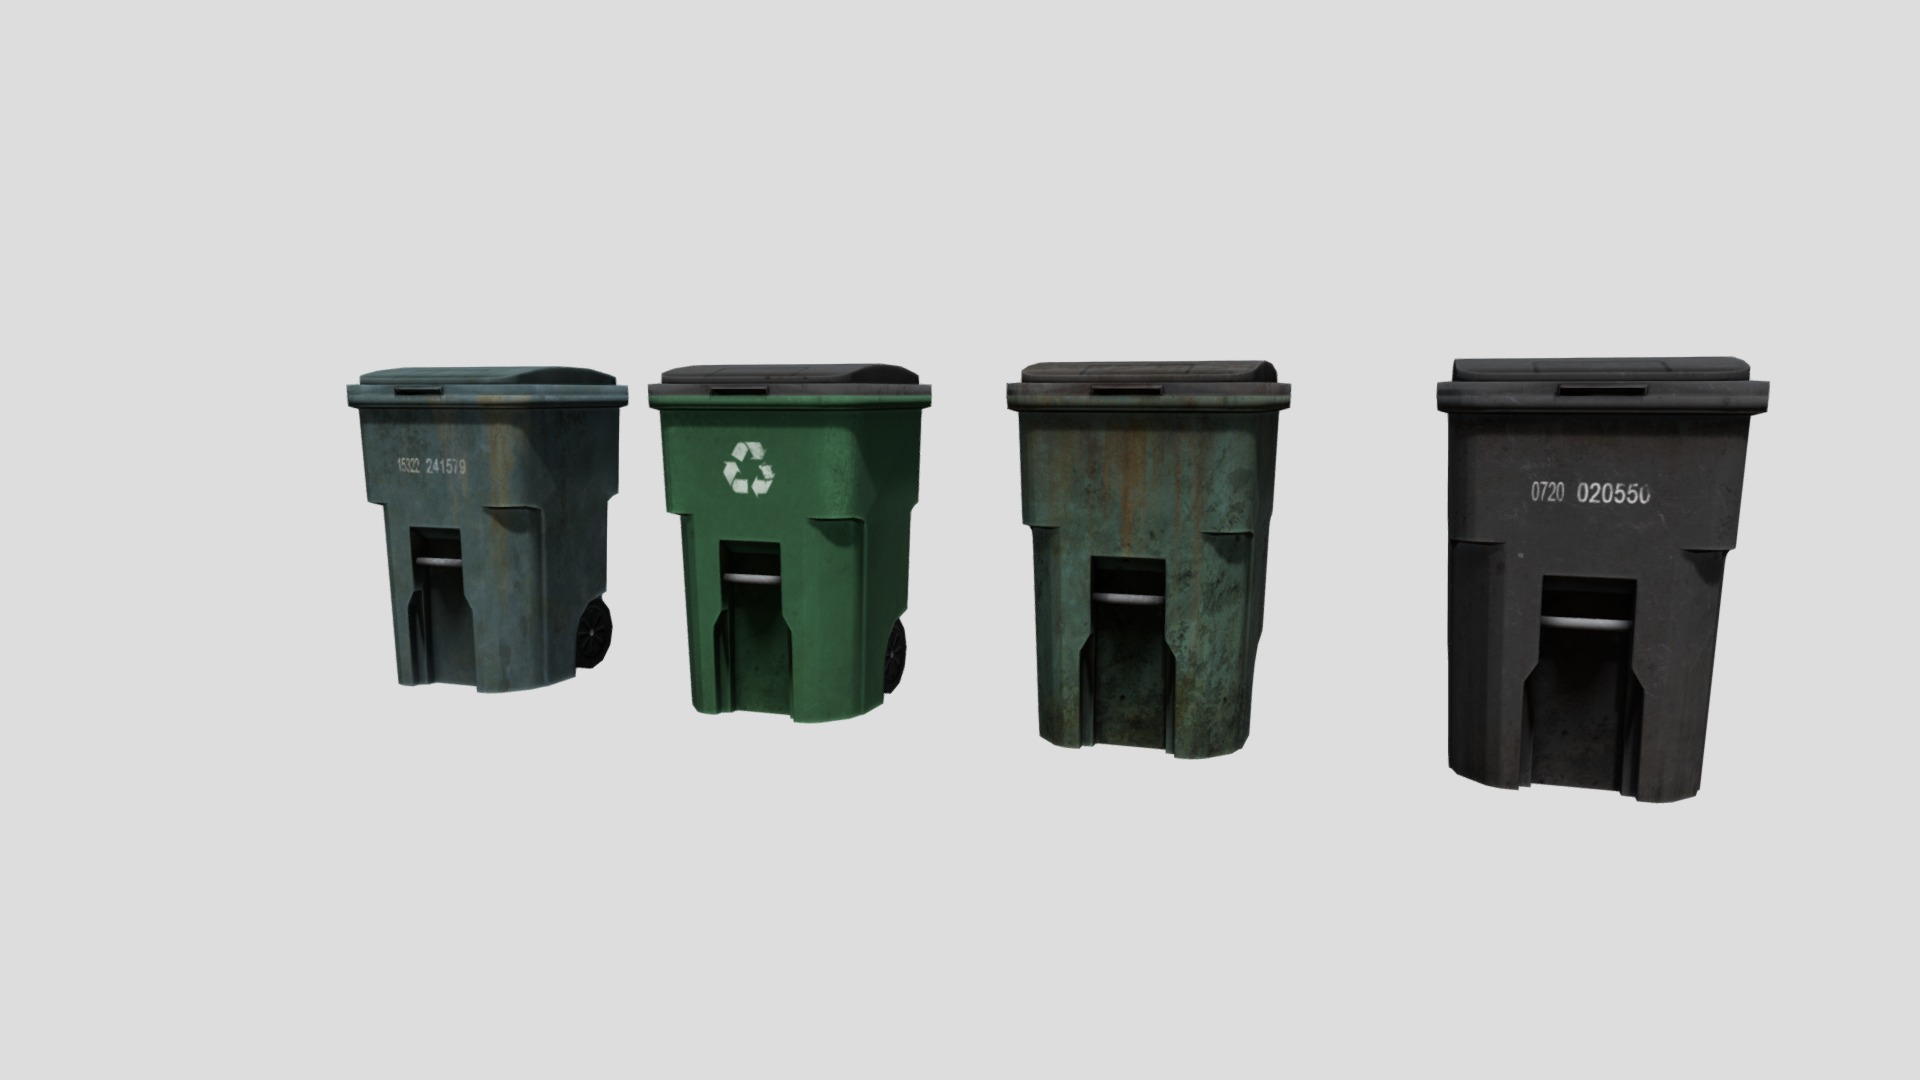 3D model Trashcans - This is a 3D model of the Trashcans. The 3D model is about a group of black and green speakers.